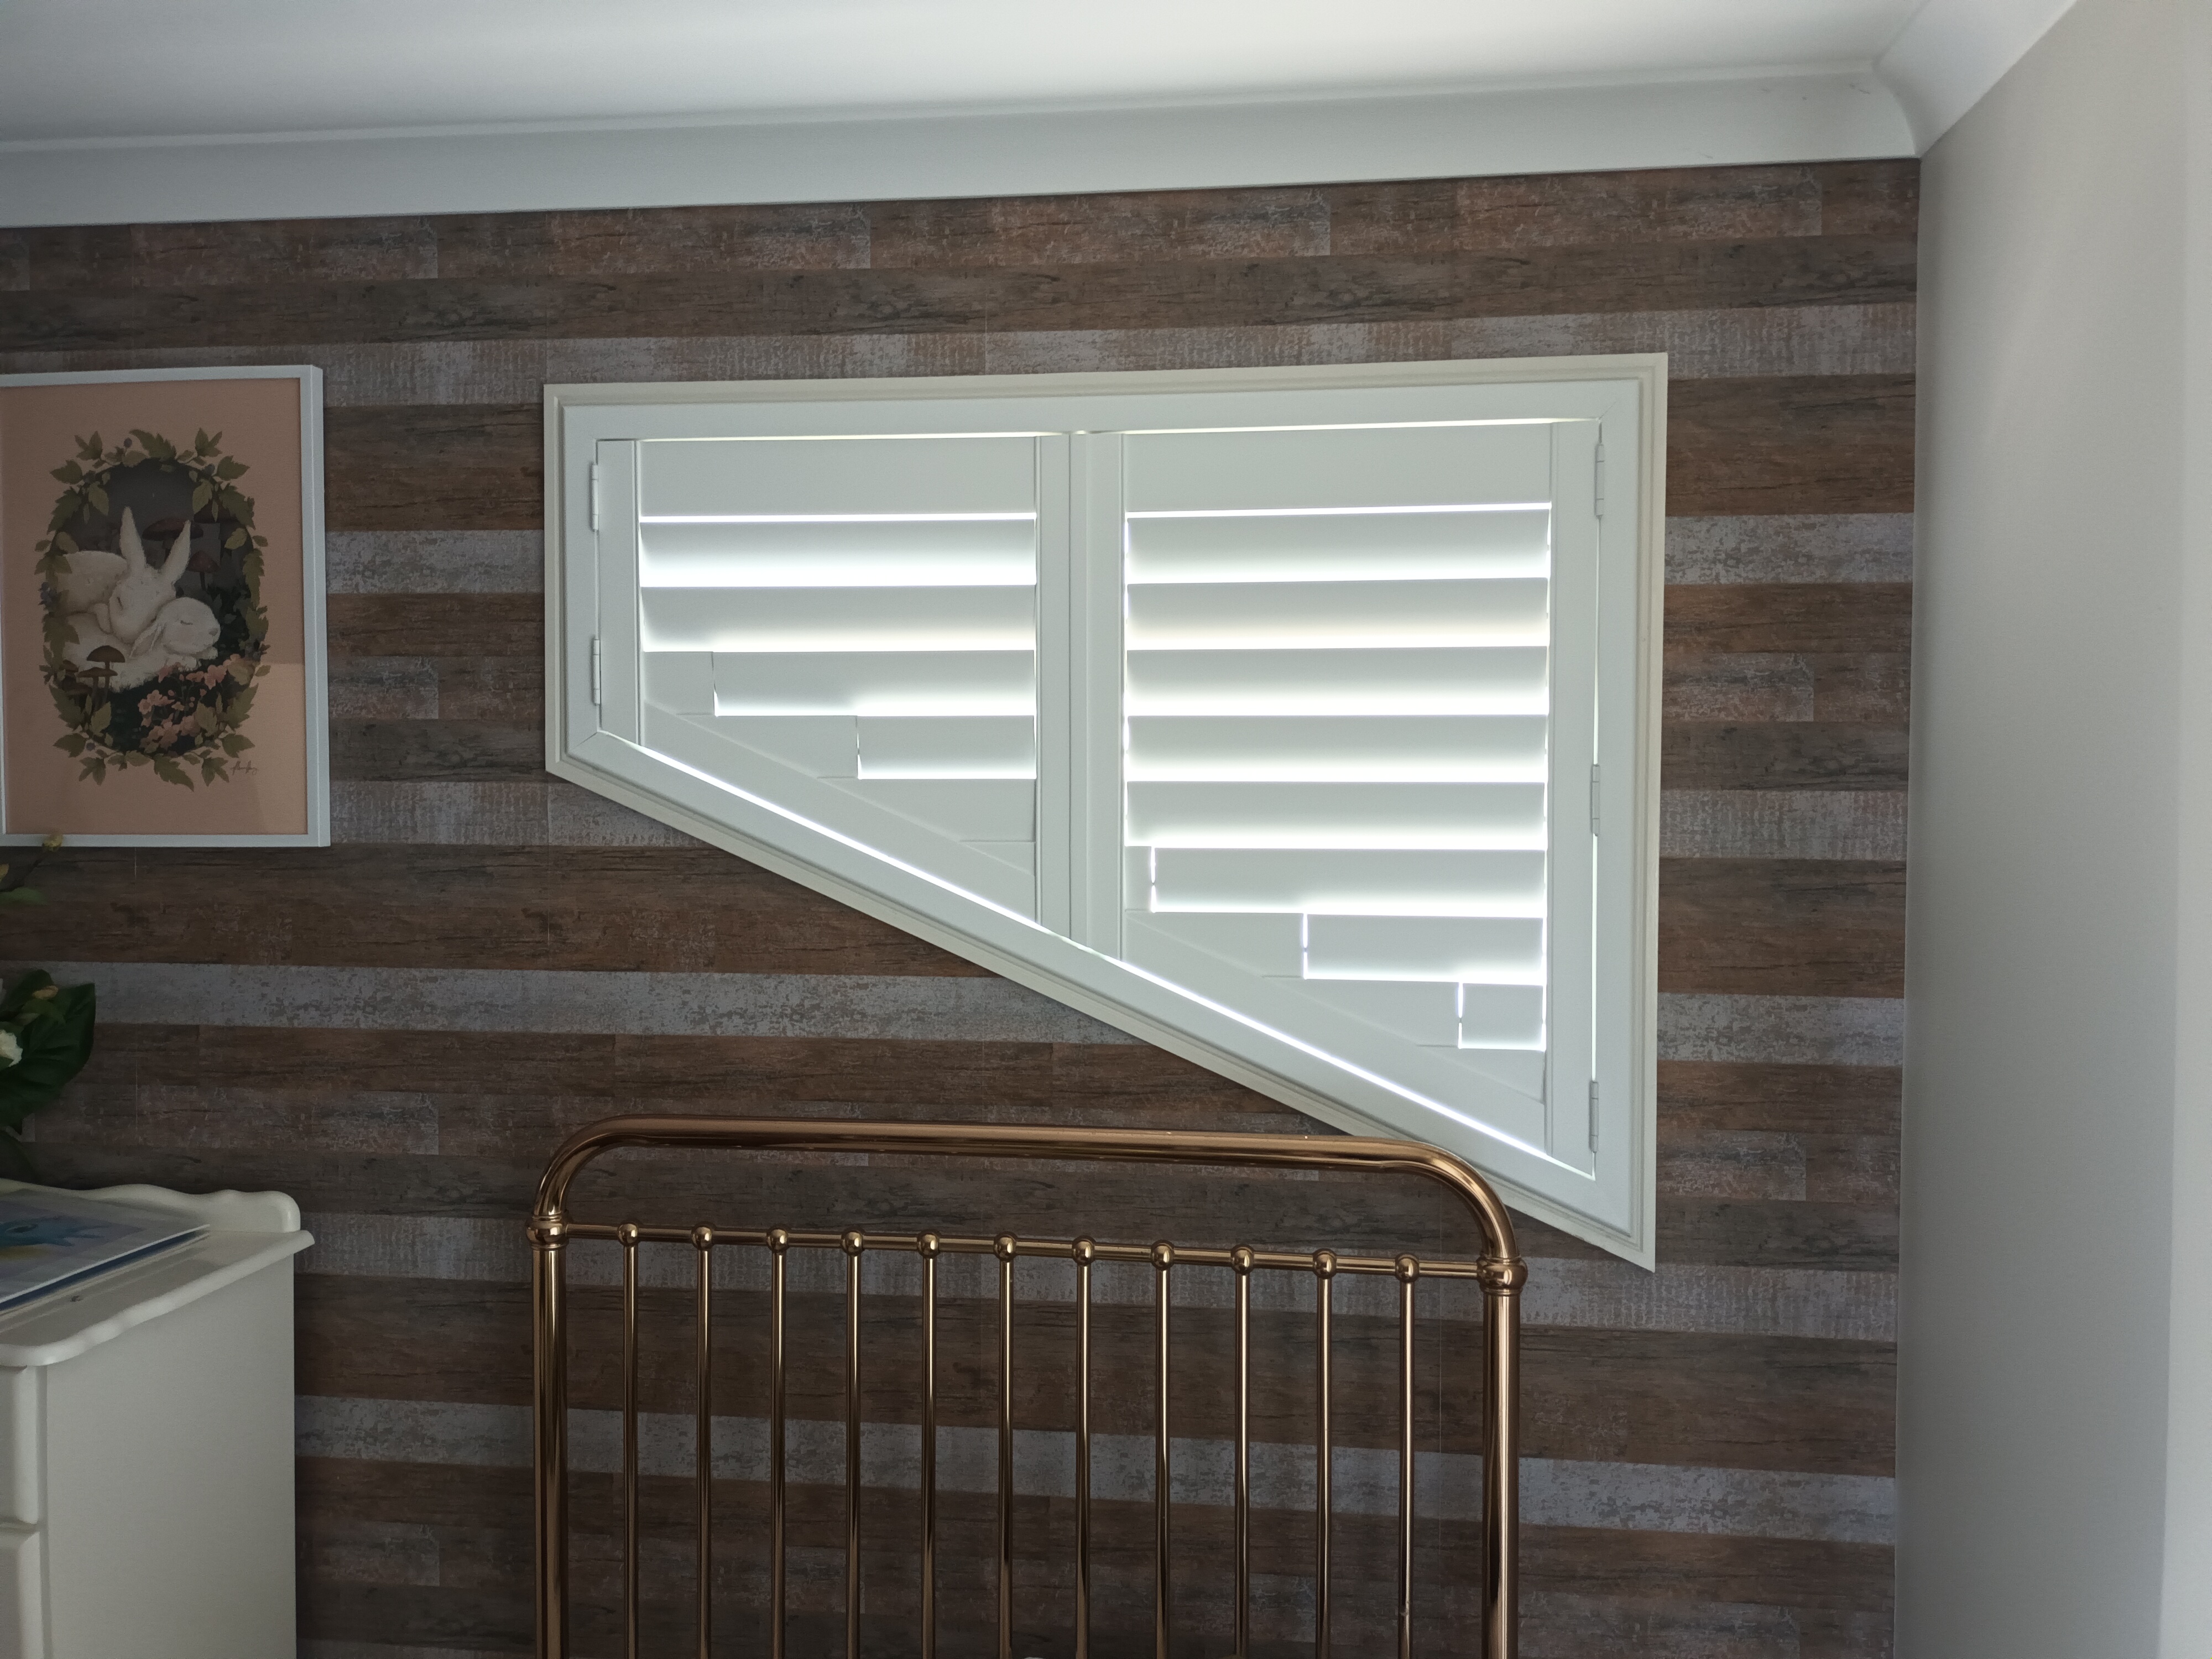 OUT OF SQUARE PVC PLANTATION SHUTTERS